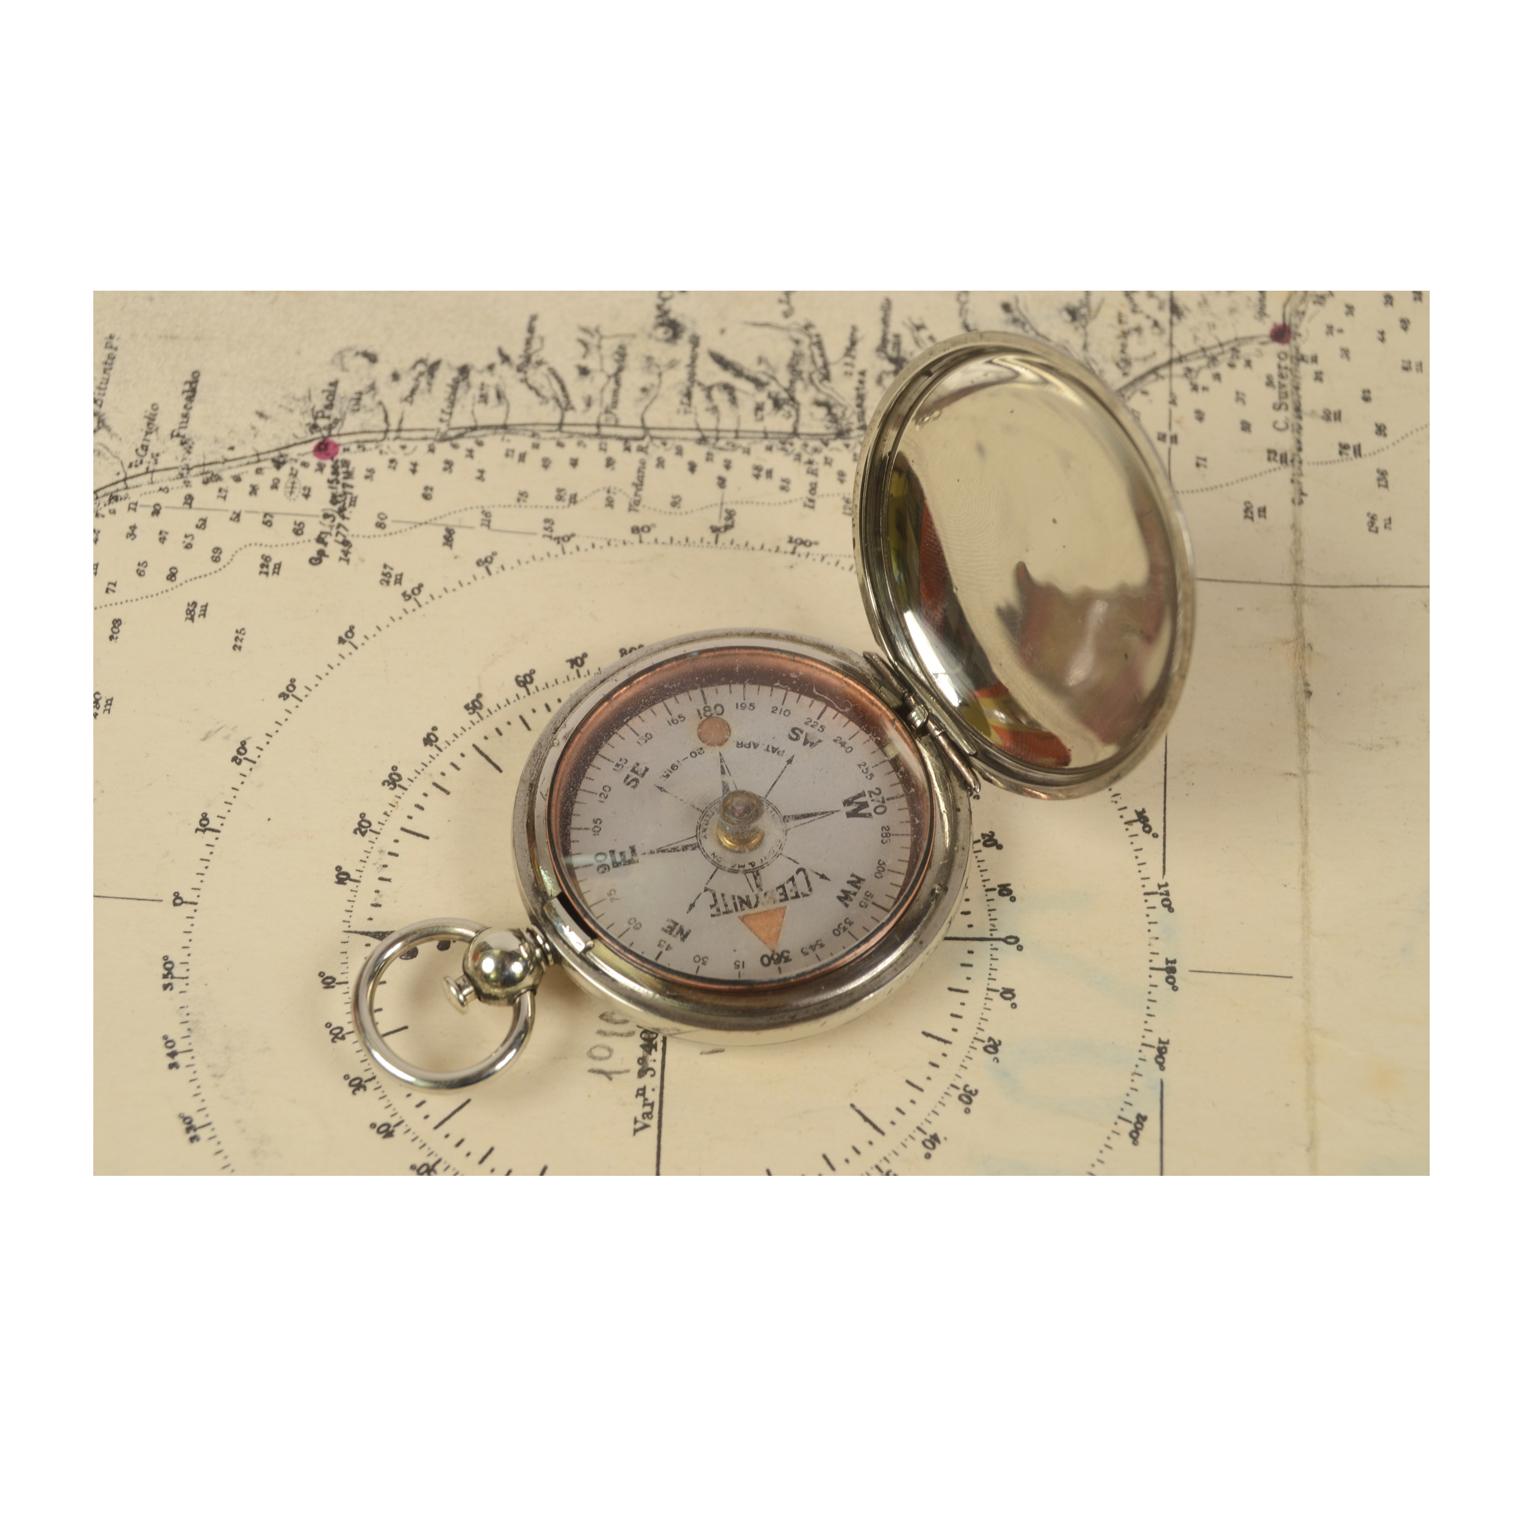 Pocket compass used by American aviation officers, 1915, of brass in the shape of a pocket watch, signed Ceebynite Short & Mason Taylor Rochester N.Y. The compass is equipped with a lid with snap closure with release button inside the ring.